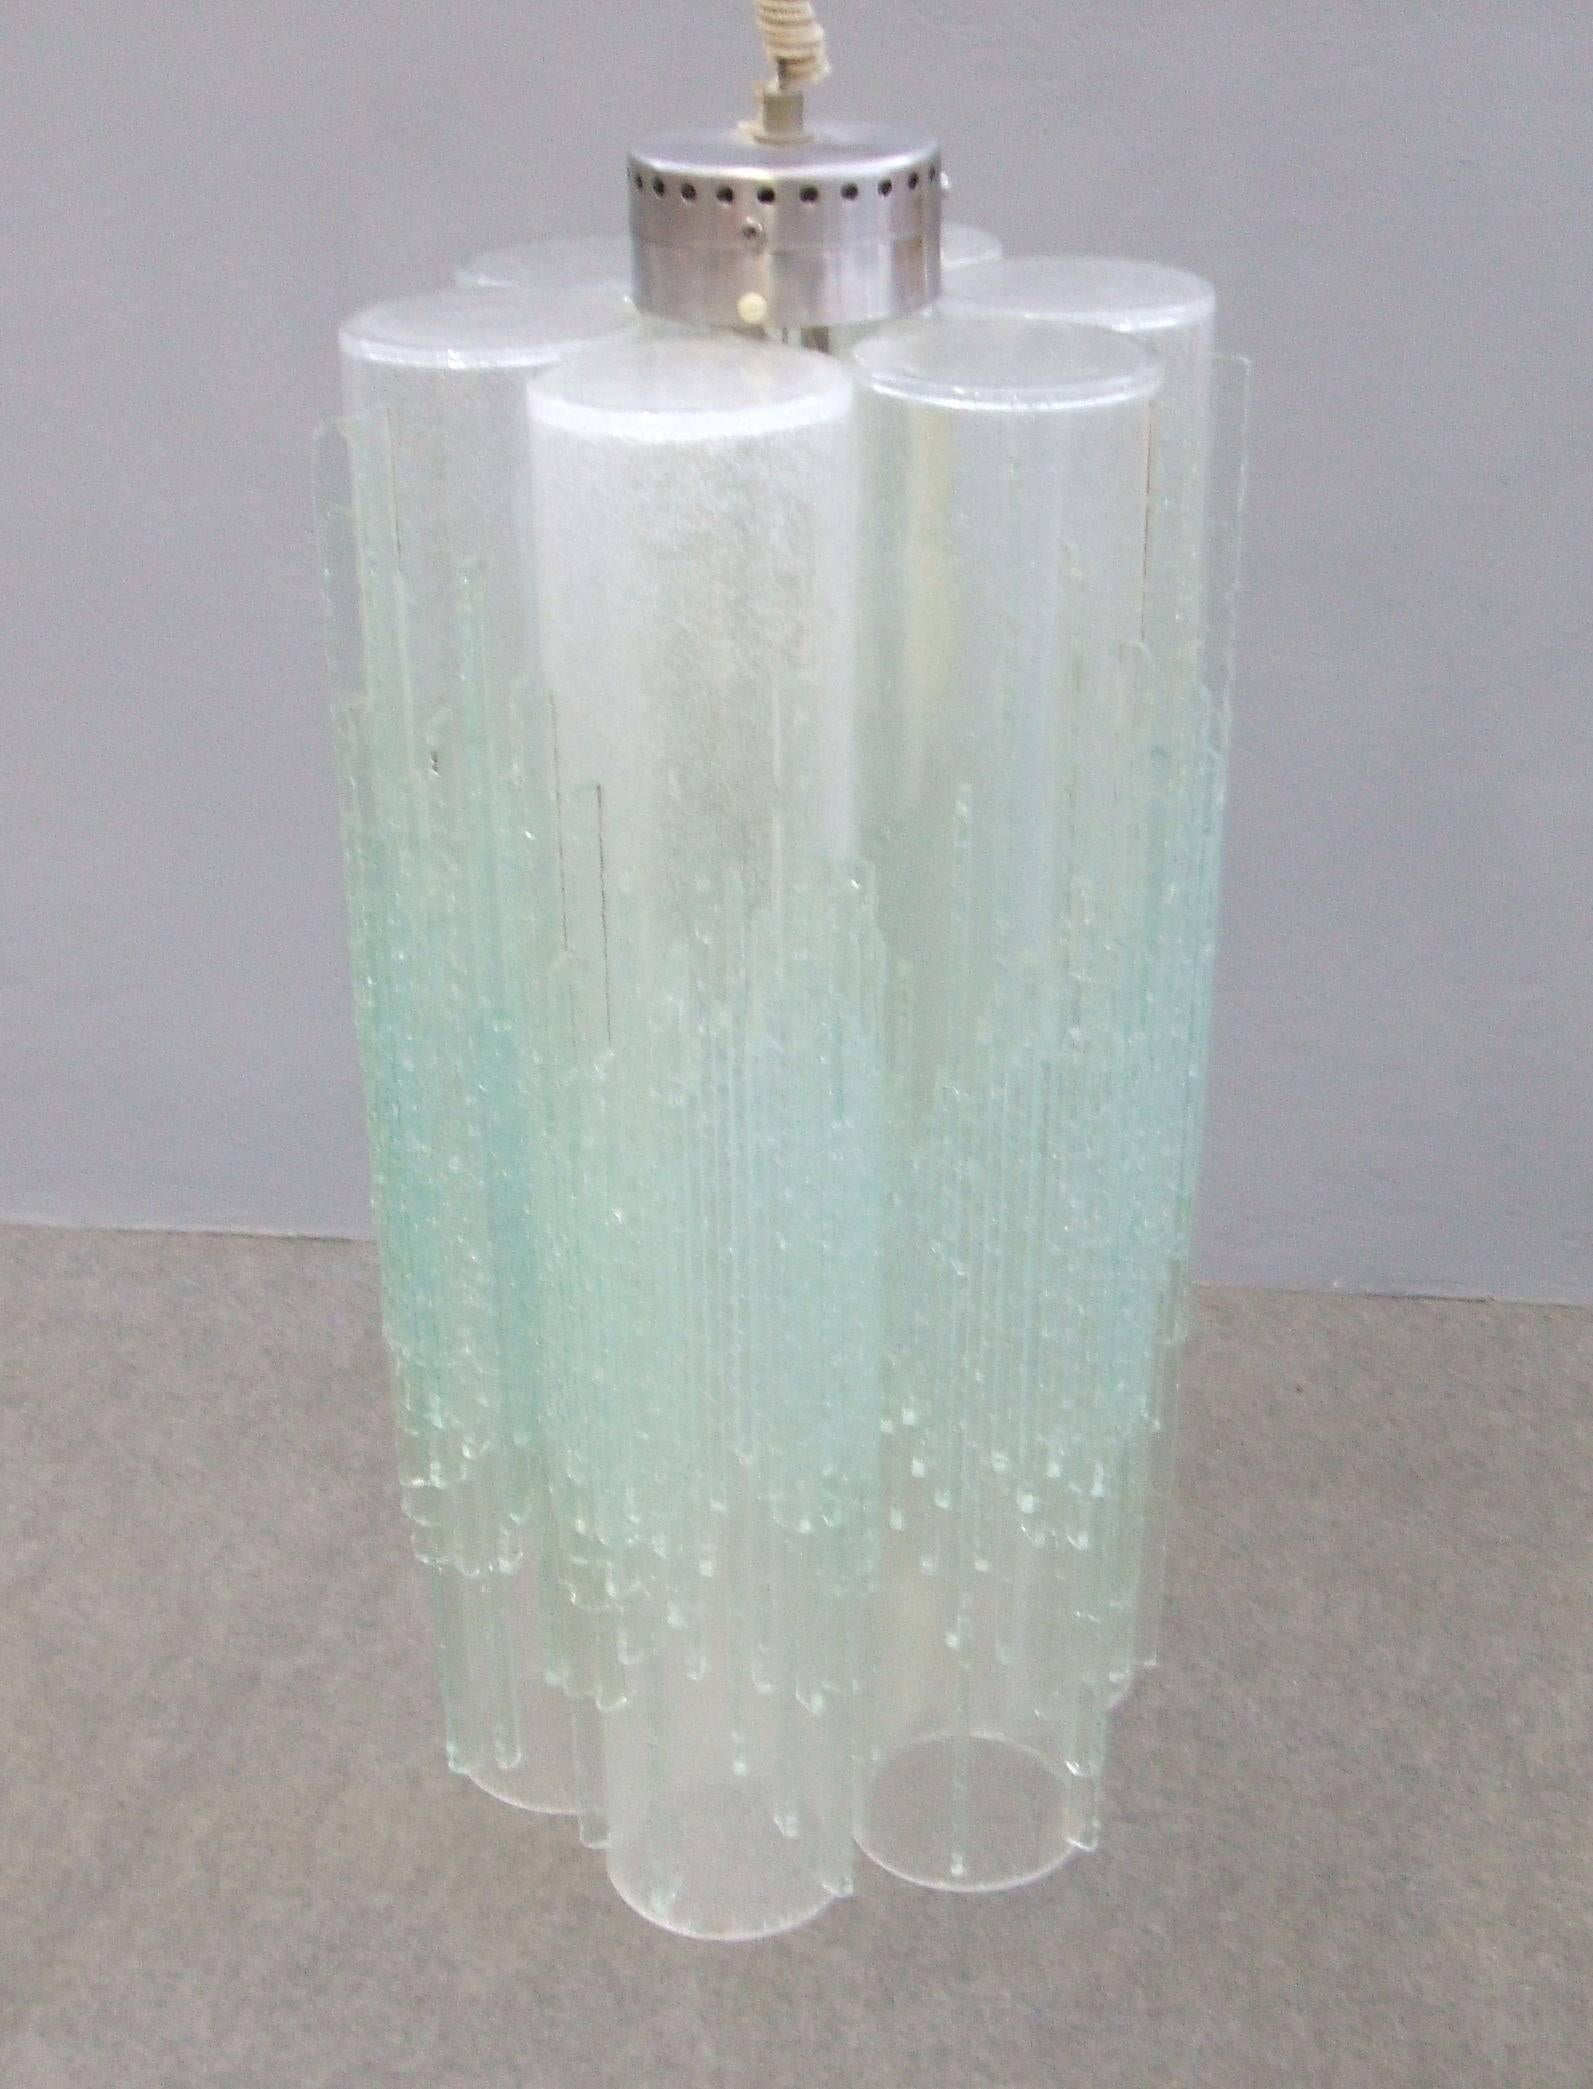 Stunning pendant by Poliarte. Murano glass decorated with glass icicles.
Each one is slightly clear blue and green tint.